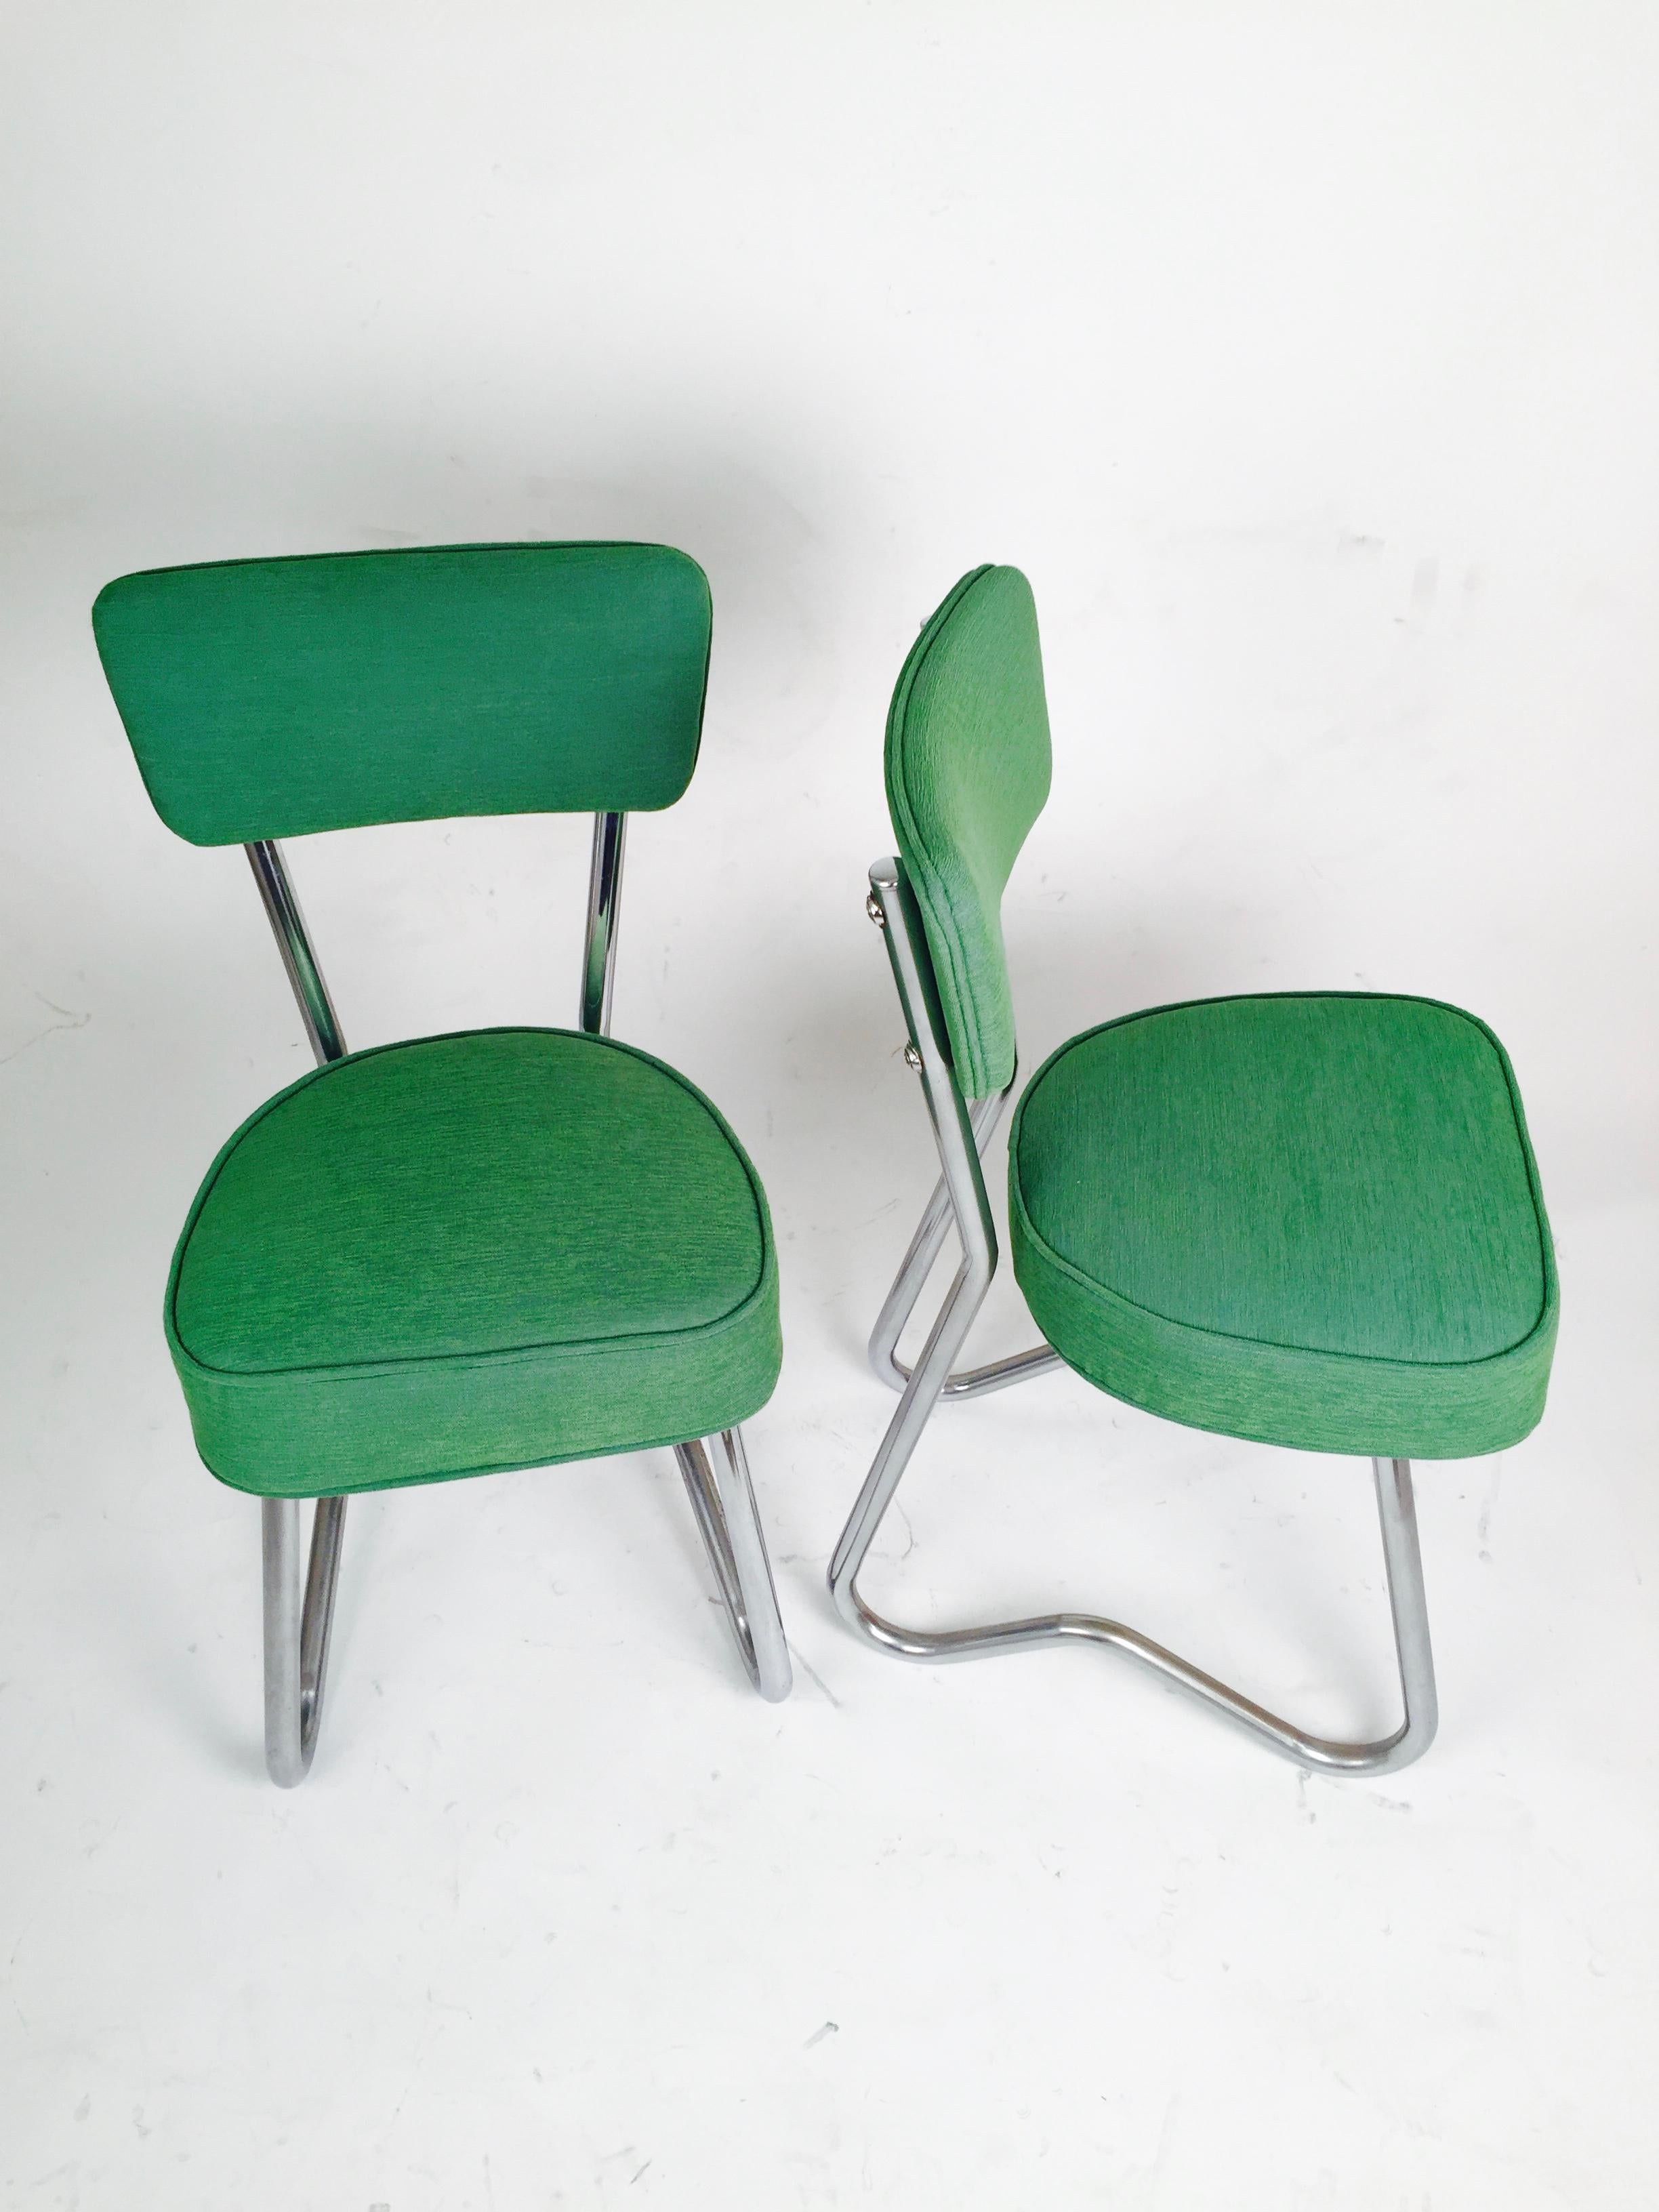 Pair of French Rationalist Chairs, Model 